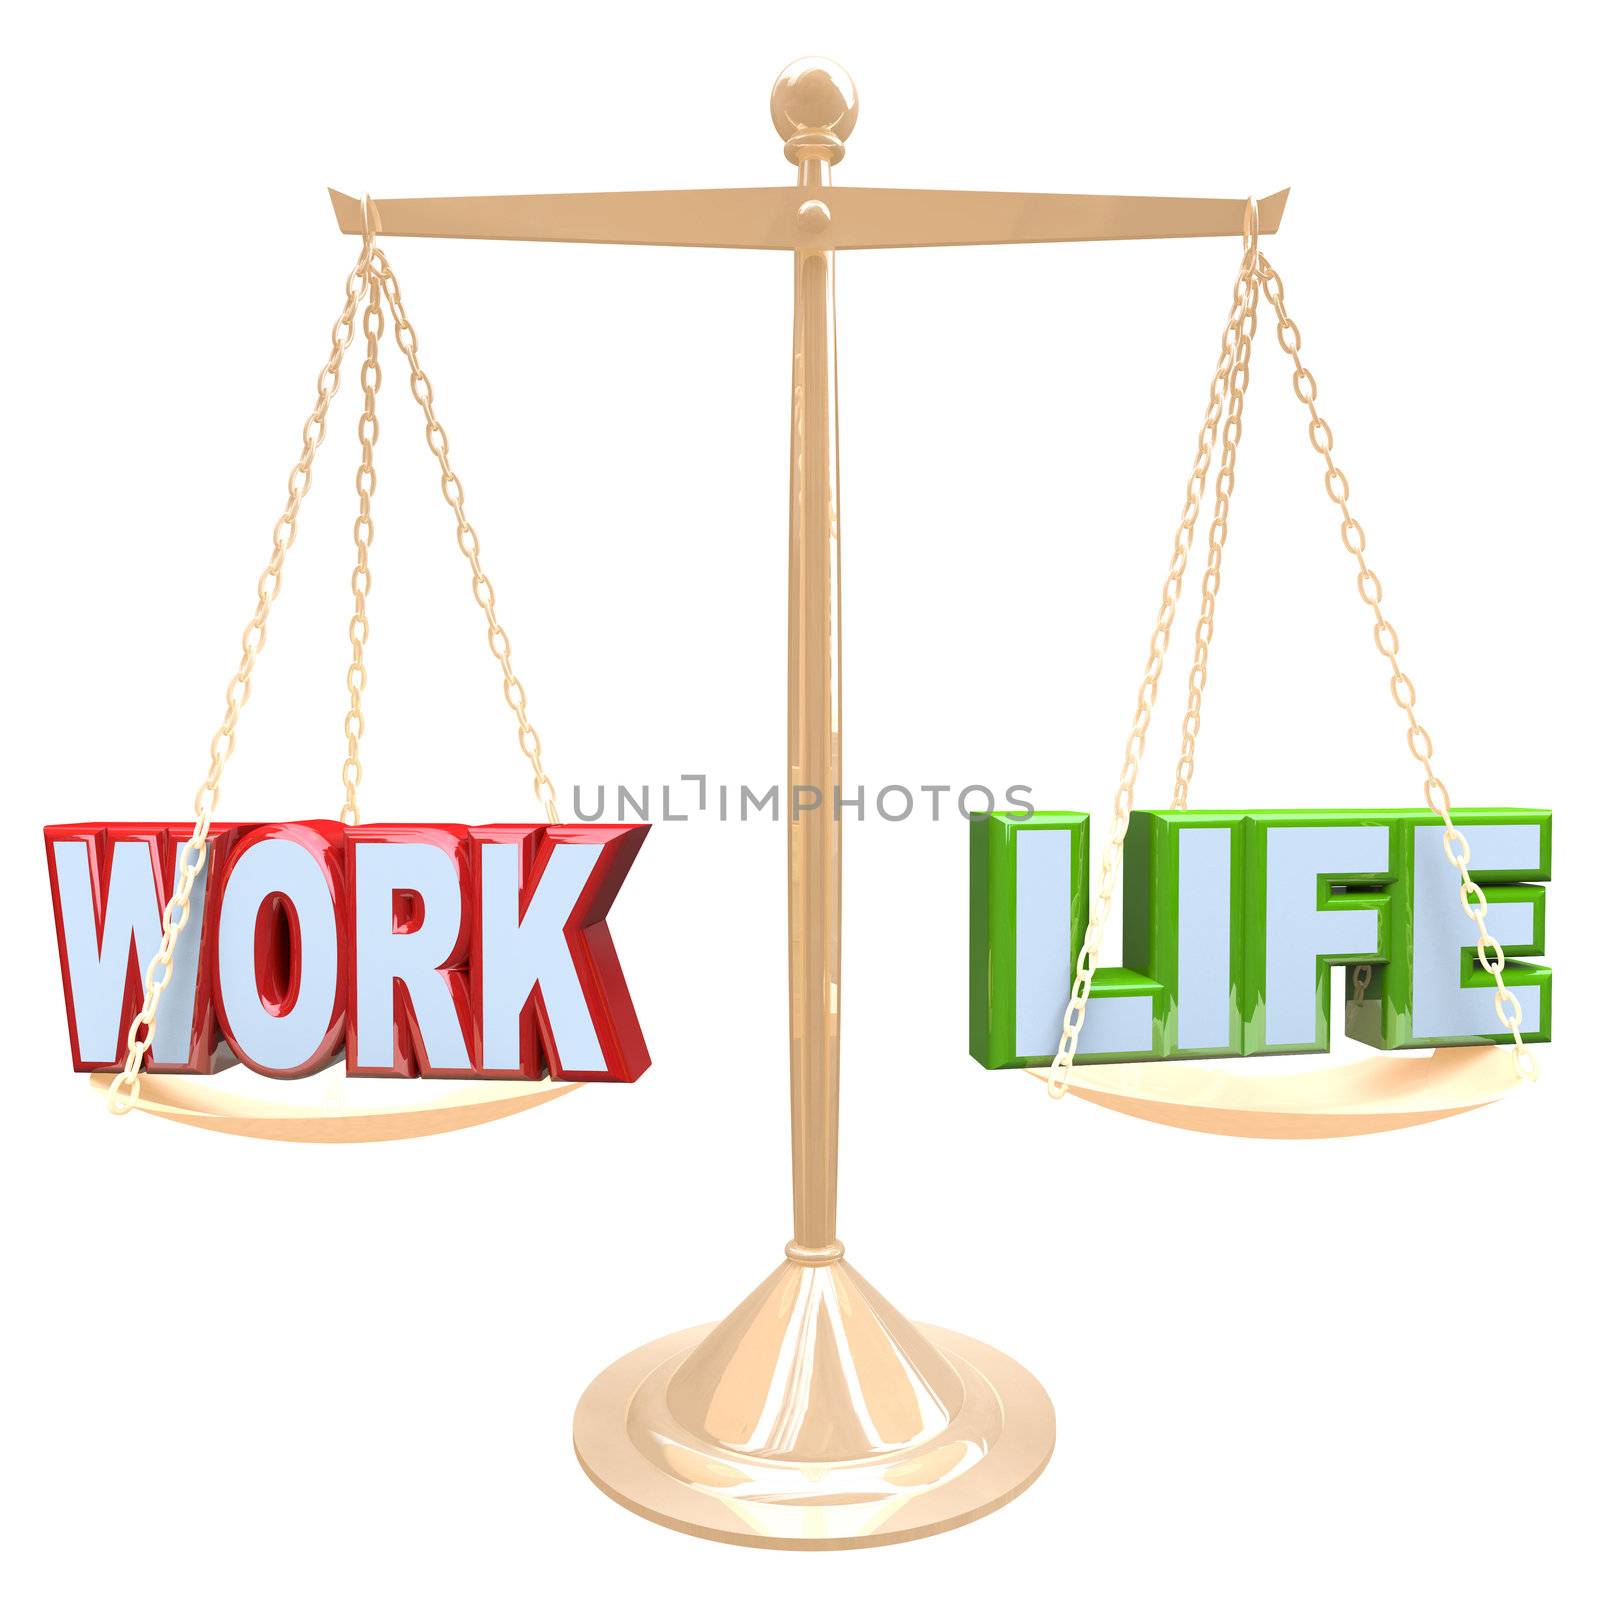 The words Work and Life are balanced against each other on a scale to determine what are the right amounts of each to create harmony in your life